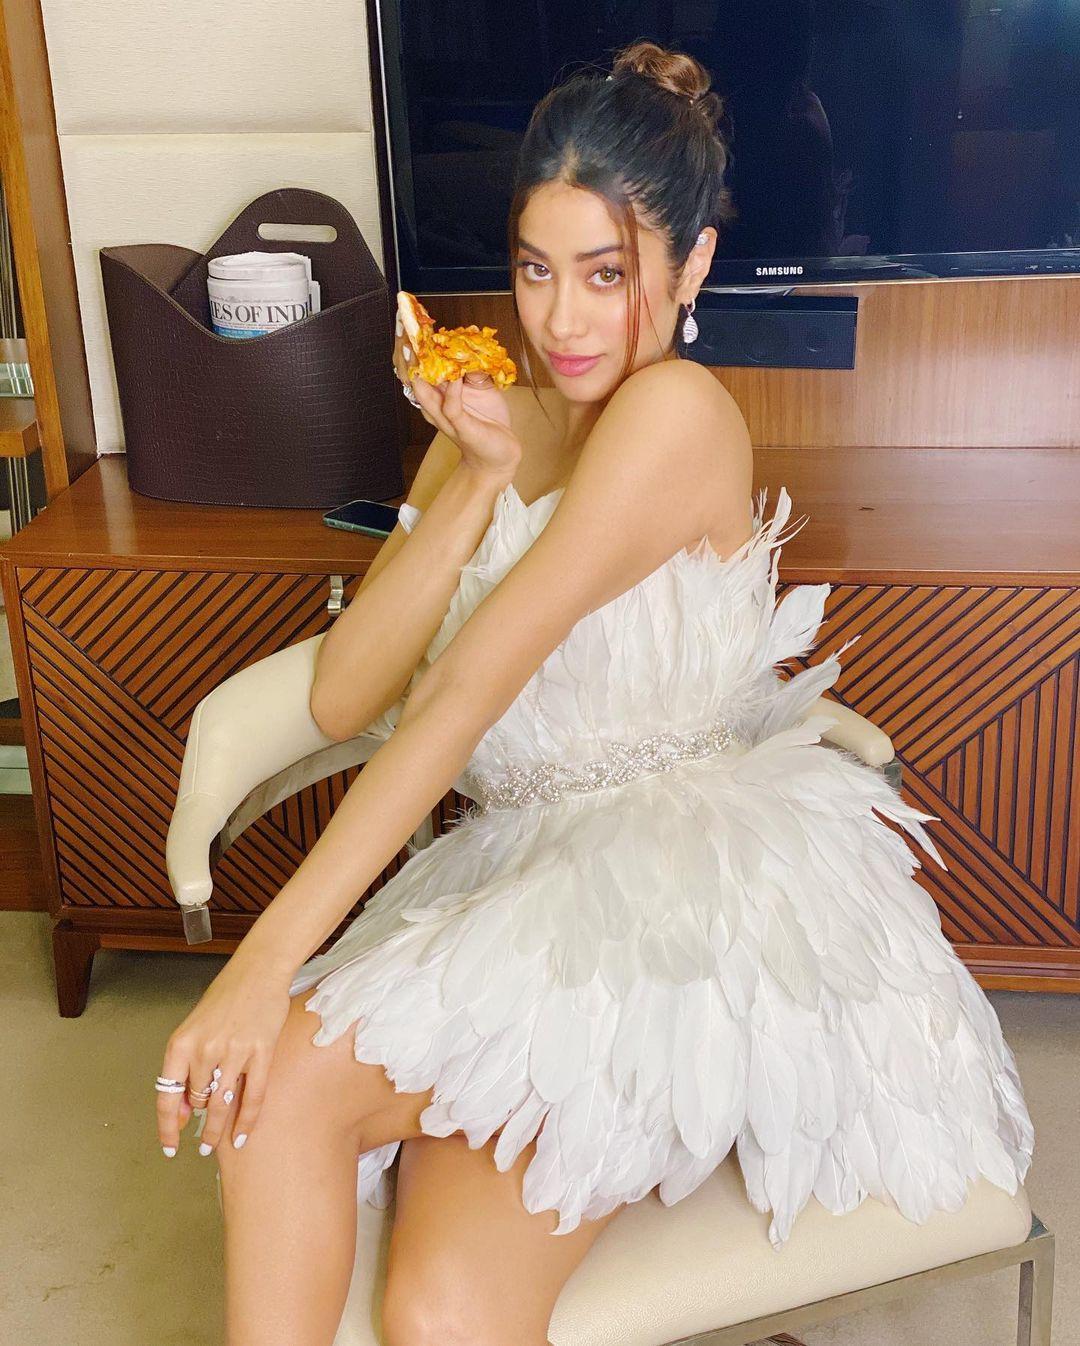 Who can forget this iconic picture? Janhvi Kapoor set unmatched glam goals as she dined on a slice of pizza